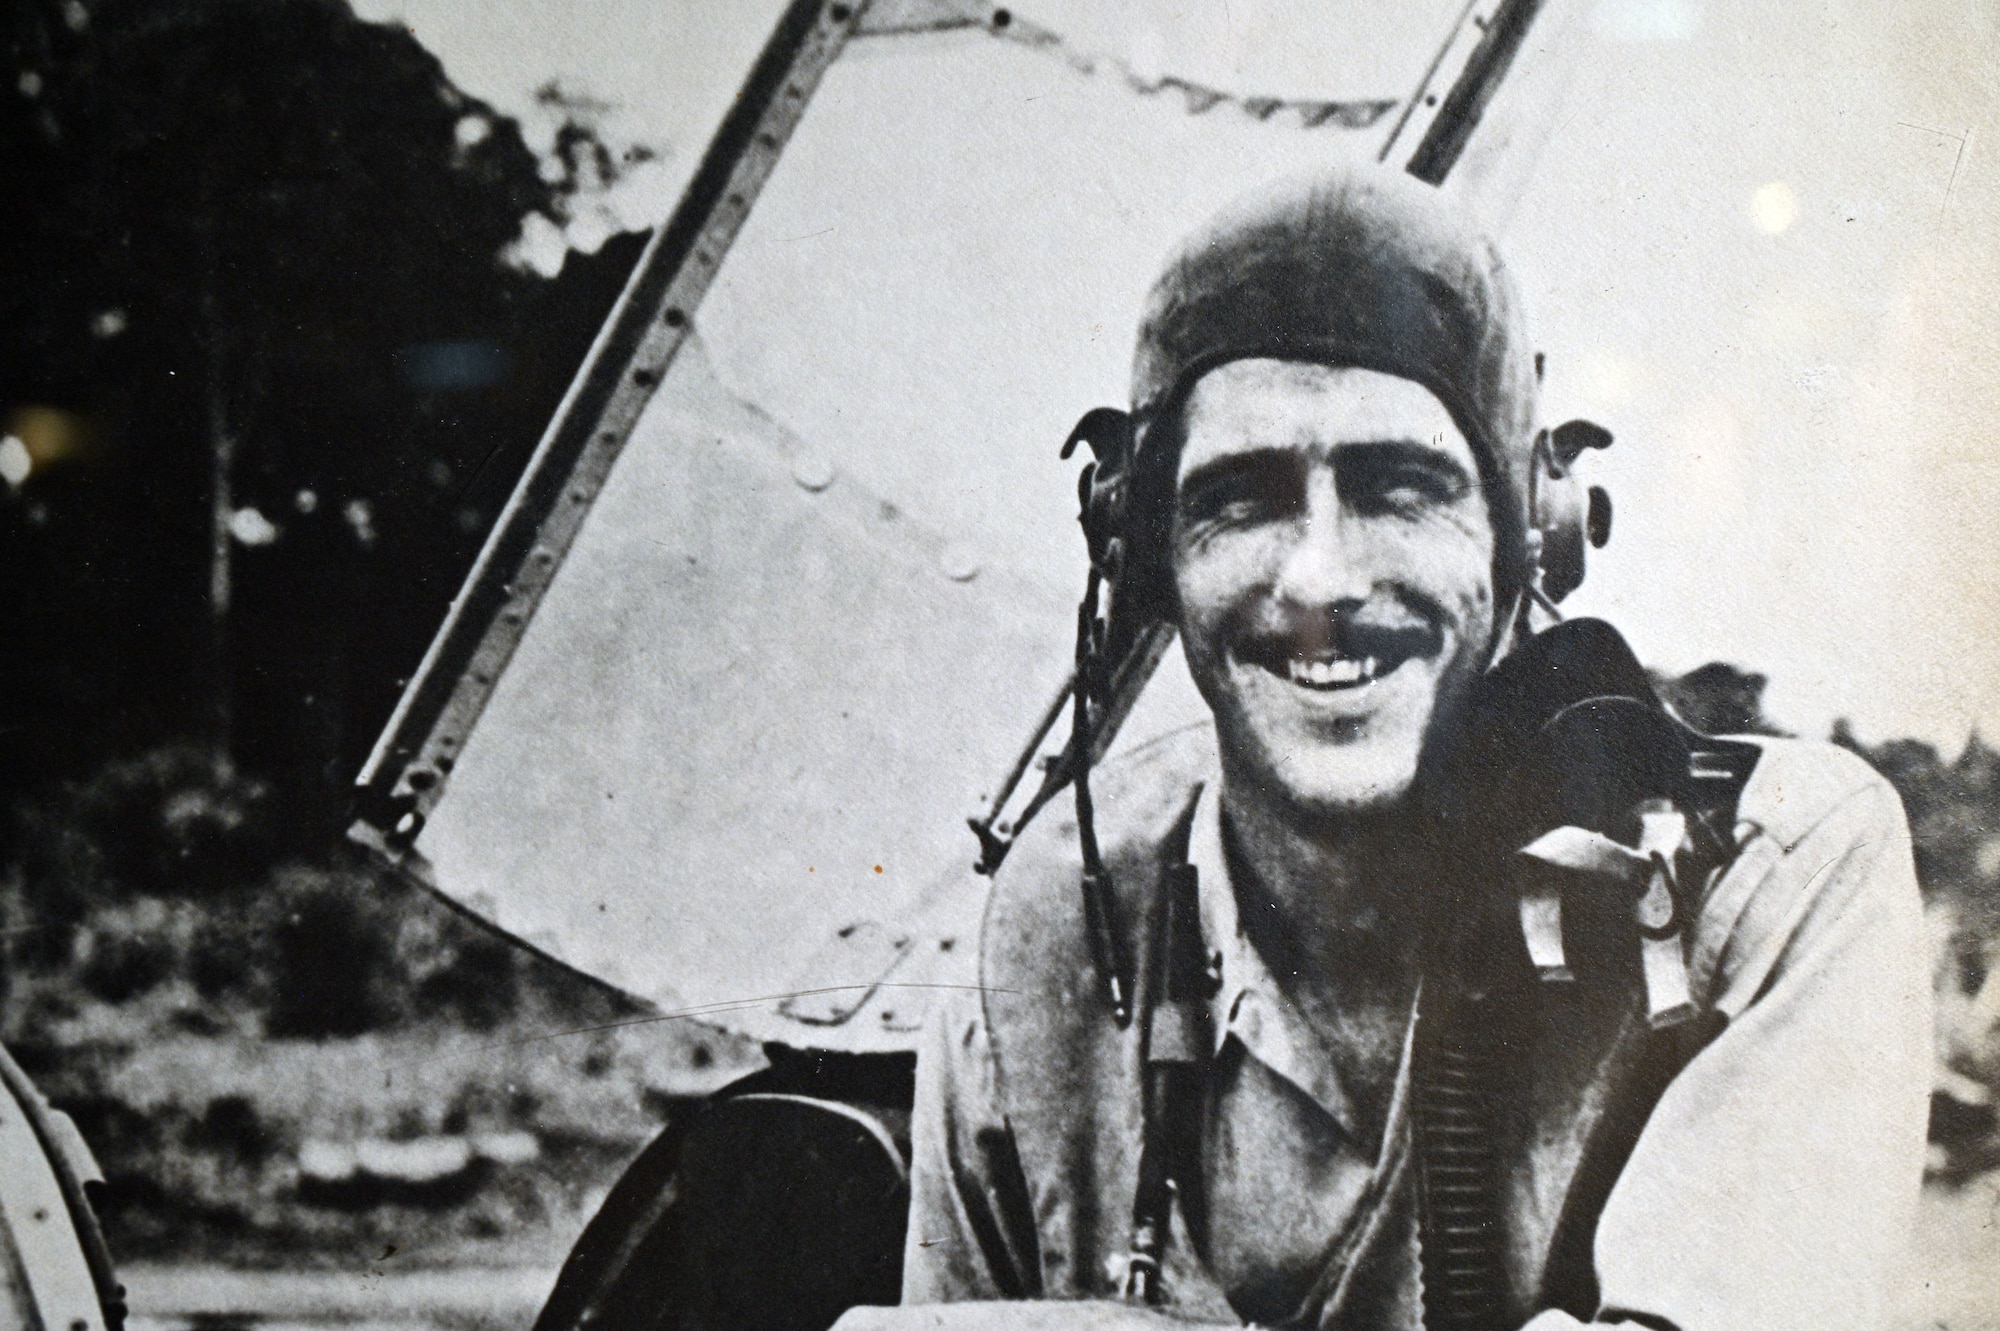 Dayton, Ohio -- Maj. Thomas B. McGuire Jr. in the Southwest Pacific theater during WWII (U.S. Air Force photo)